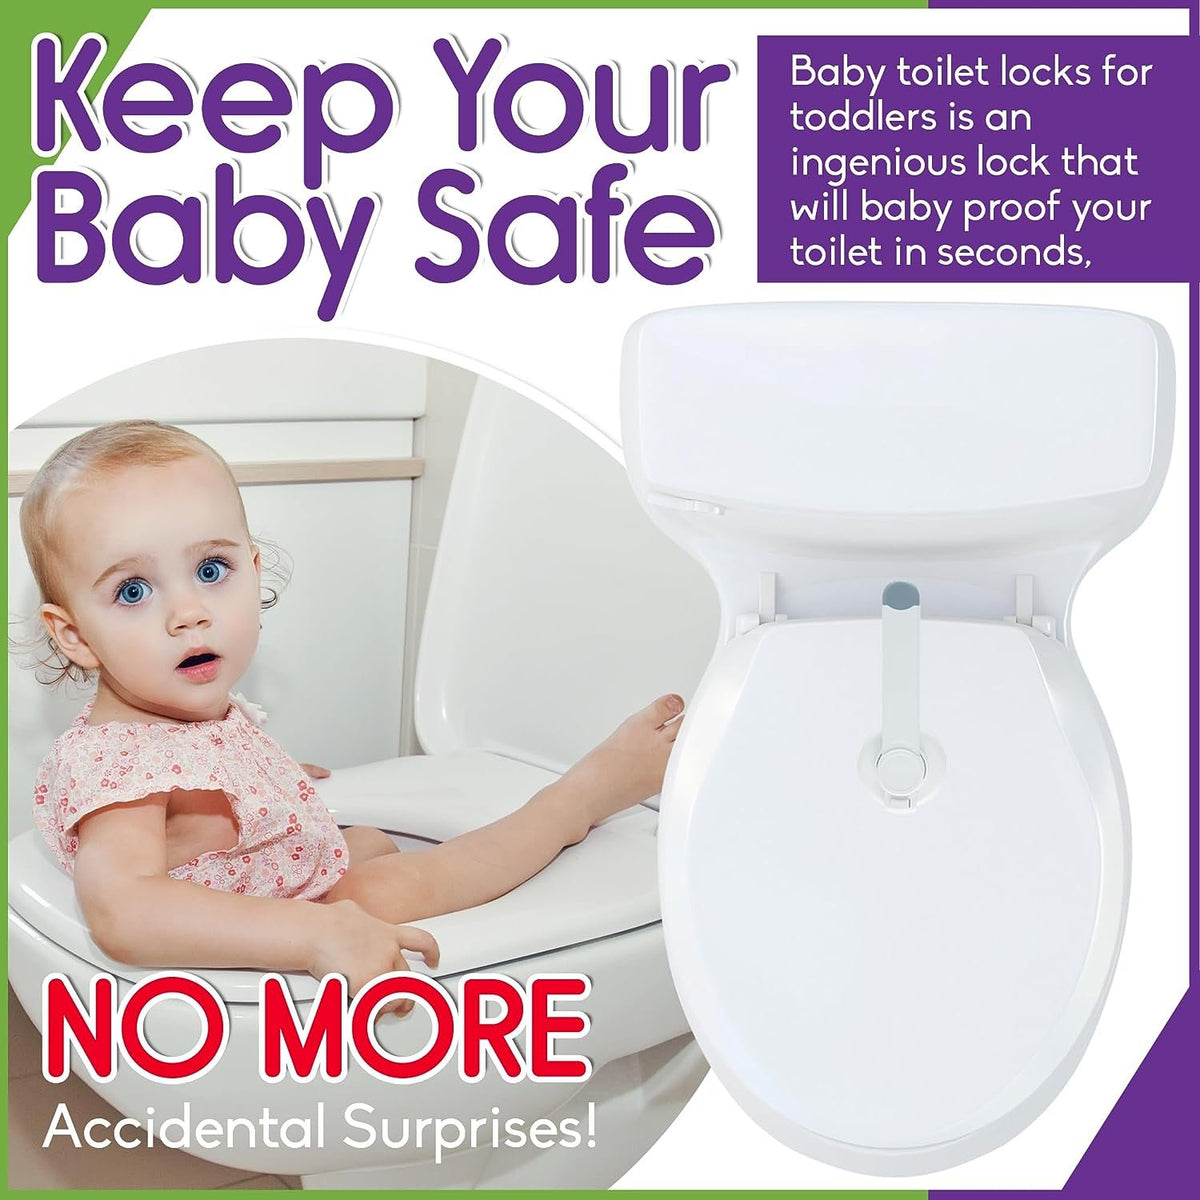 Mars Baby Child Safety Toilet Seat Lock - Easy to Install and Use Toilet Lock, Baby Proof Your Bathroom - Easy Install No Tools Needed - Fits Most Toilets